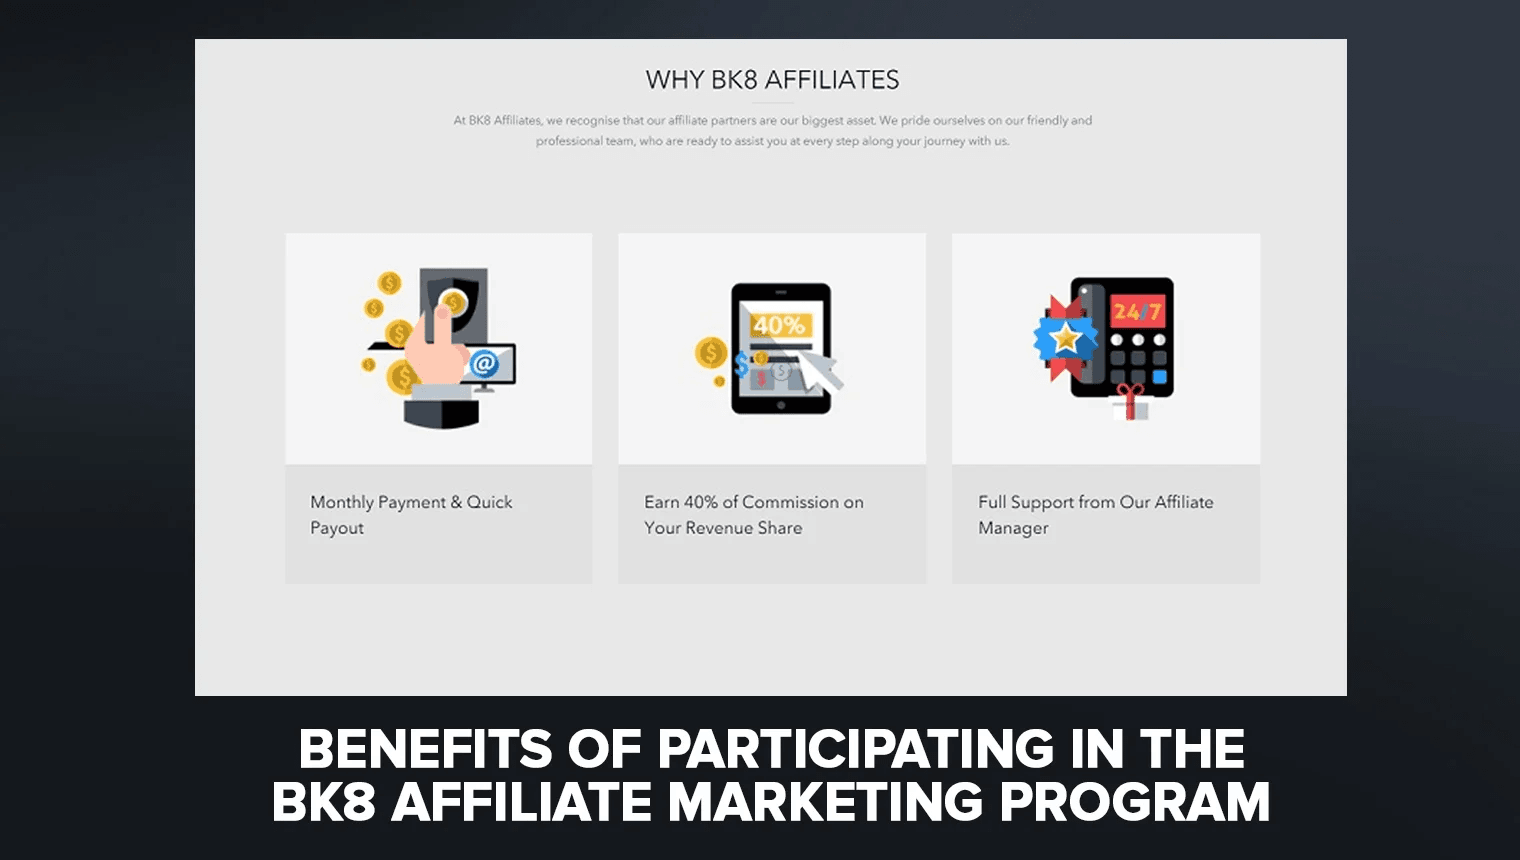 Benefits of Participating in the BK8 Affiliate Marketing Program